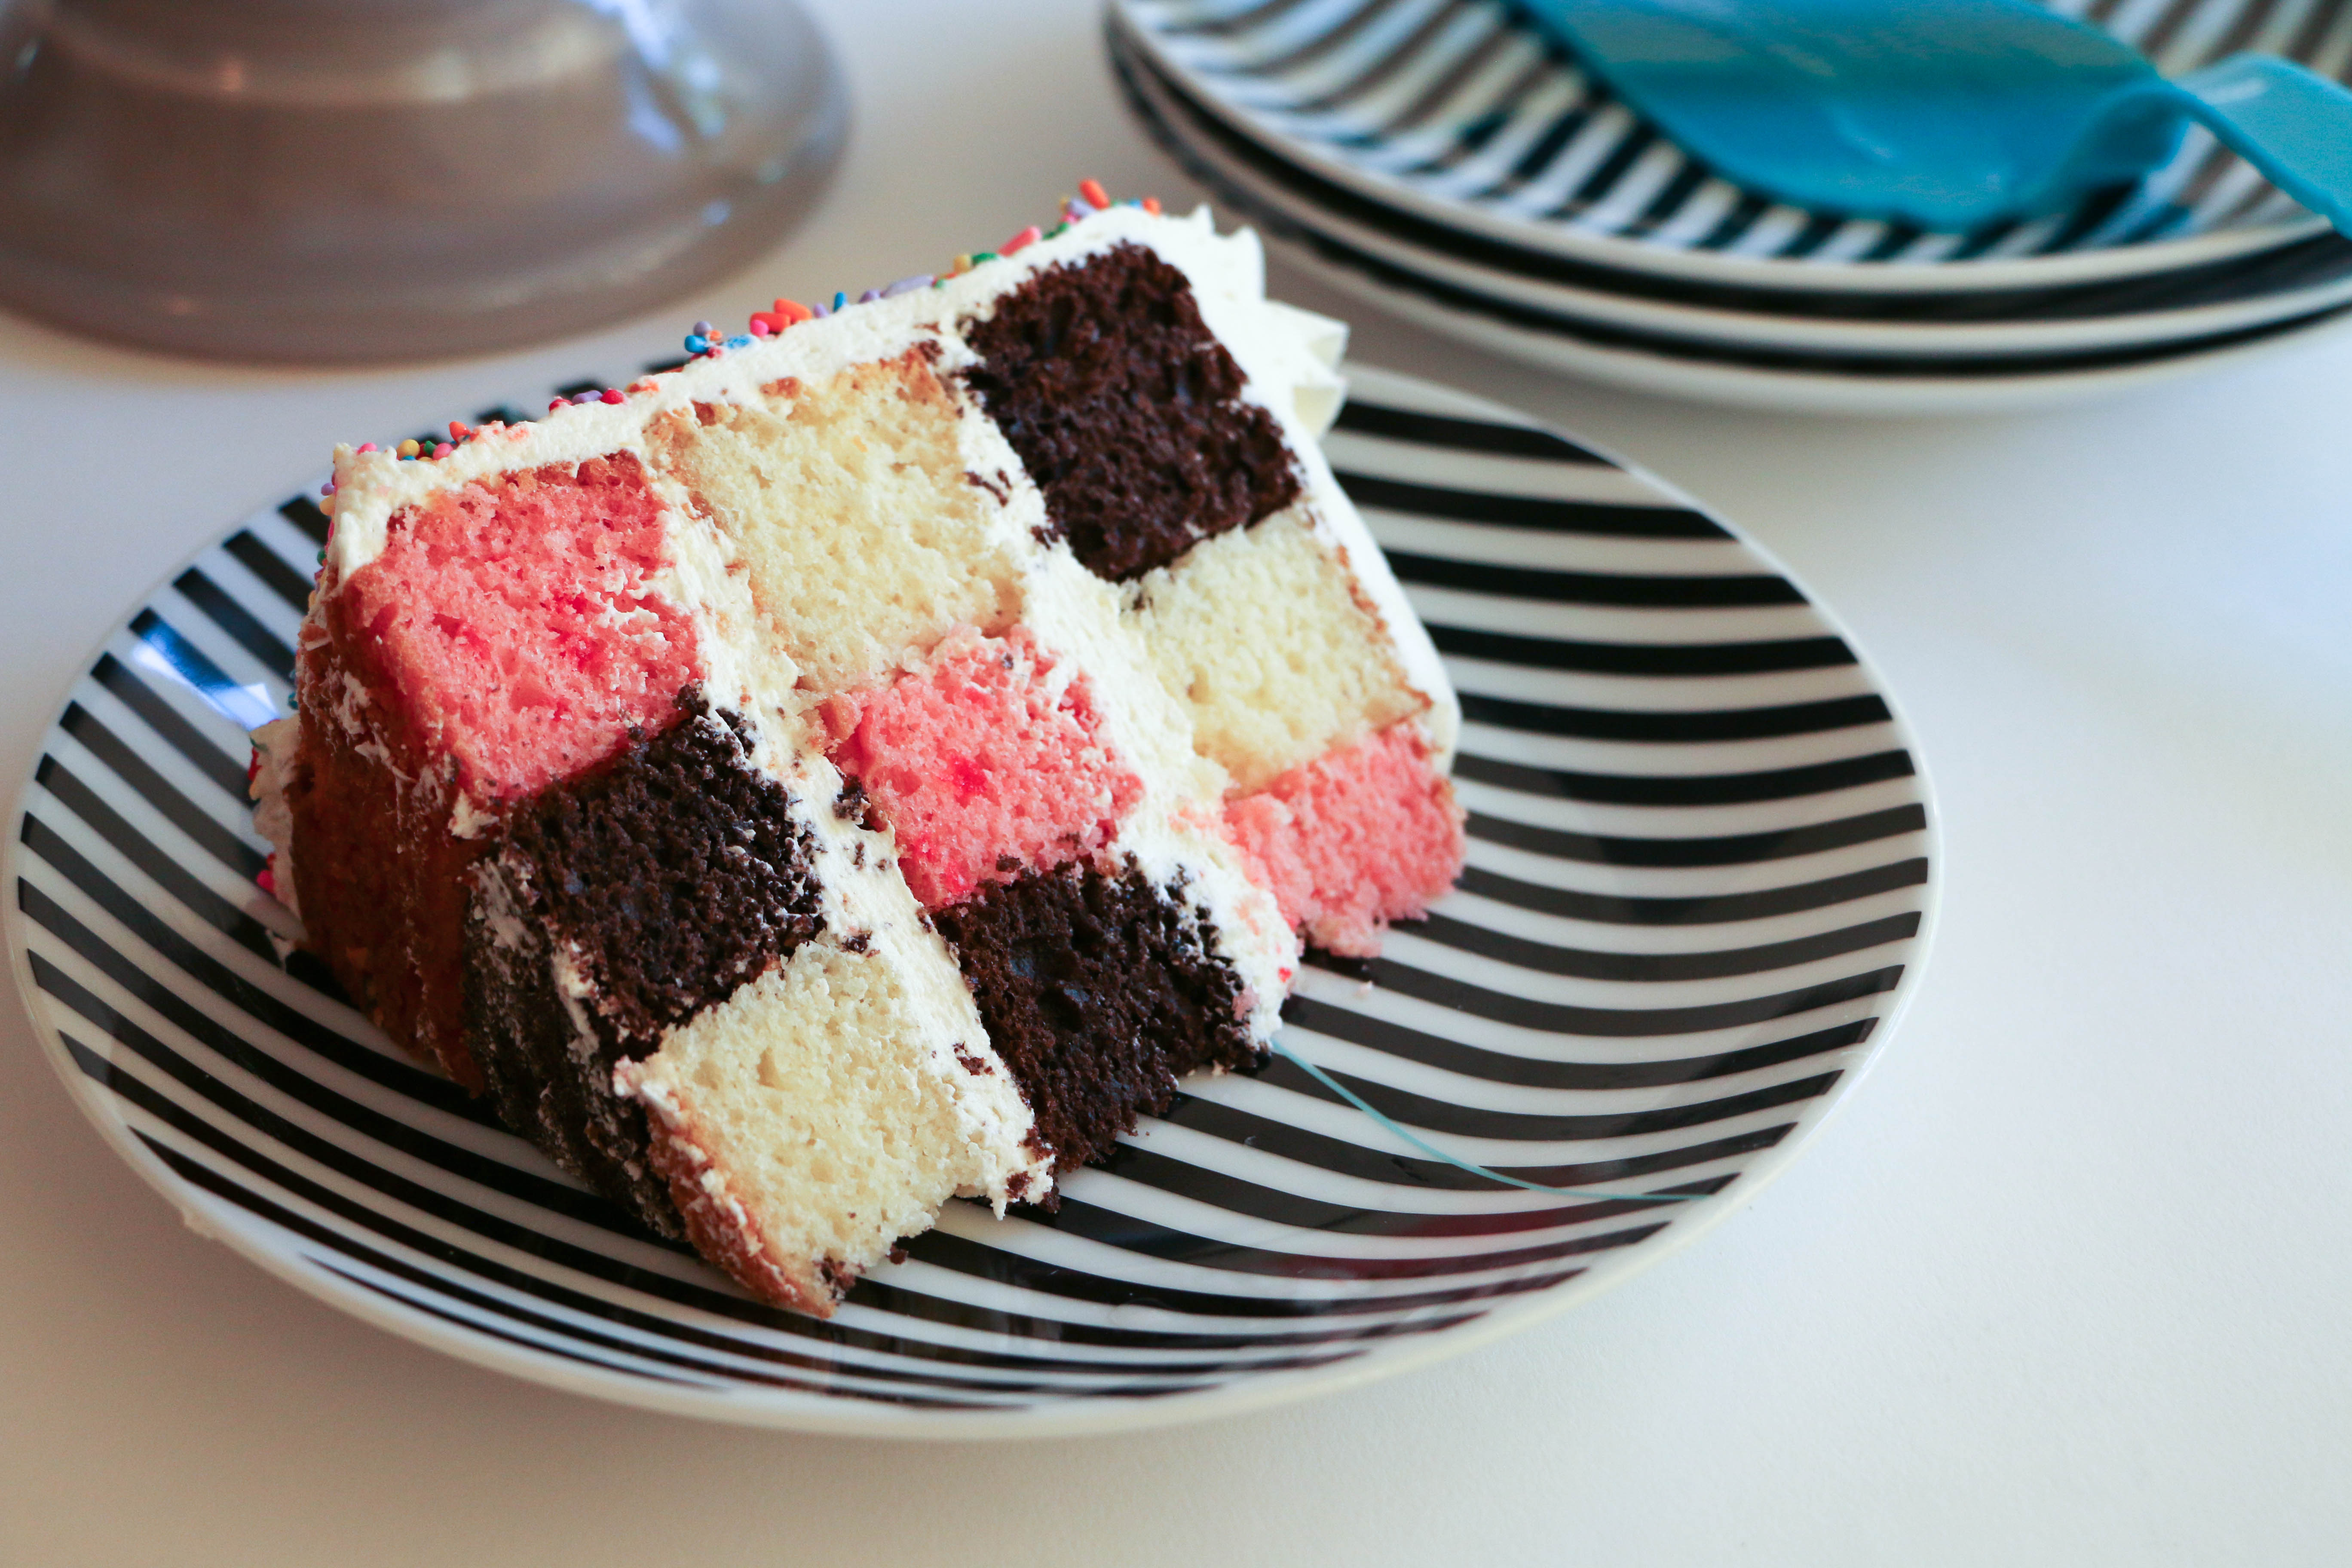 Learn how to make a checkerboard cake — without buying specialty baking pans!